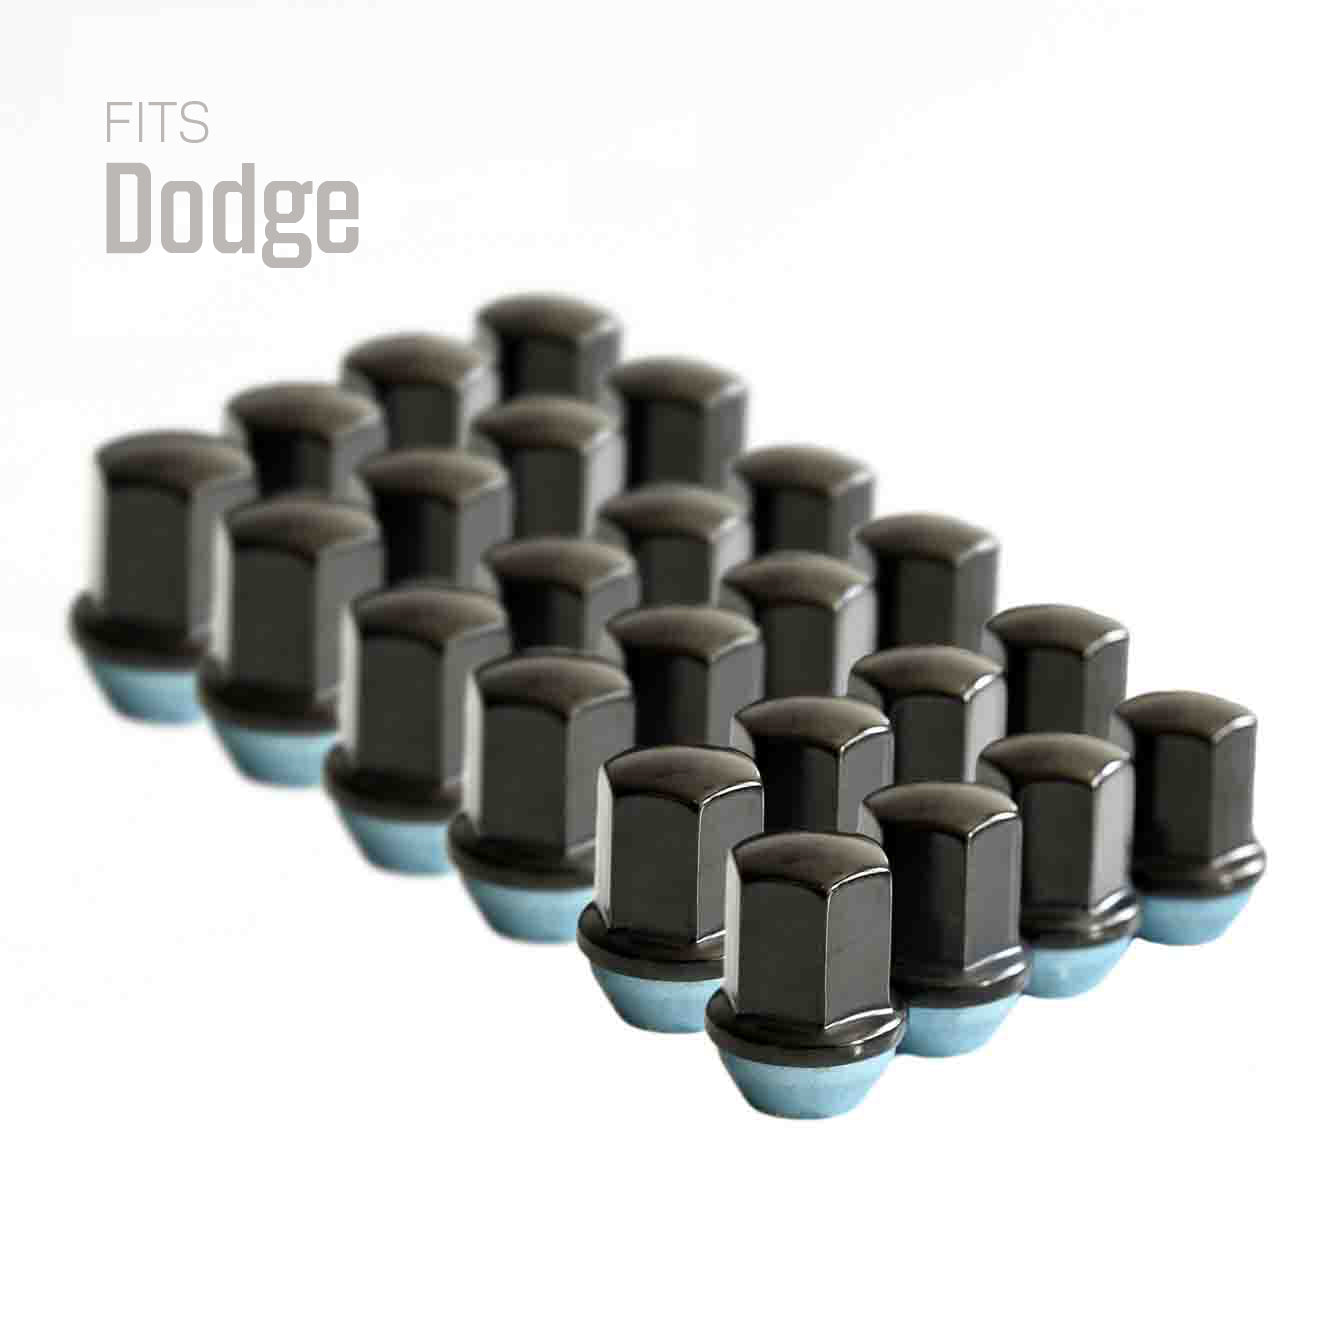 Dodge Wheel Lug Nuts Black M14x1.5 Fits Challenger, Charger, Durango  Stainless Steel Lug Nuts – Threadstrong®